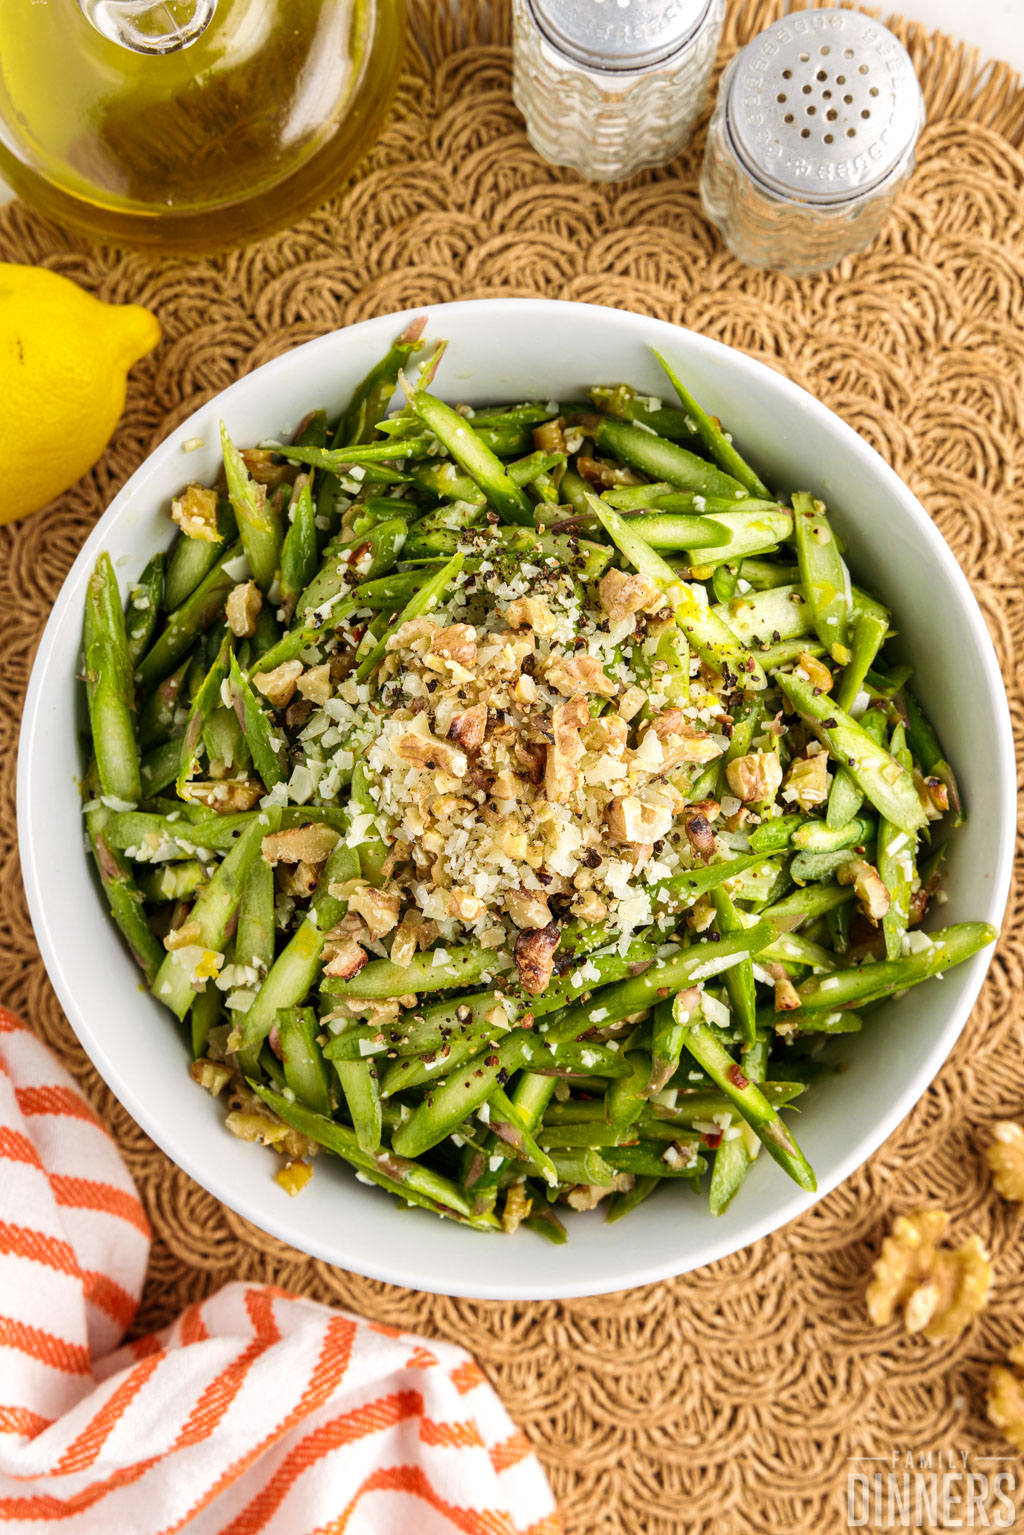 Raw asparagus salad with cheese and walnuts on top.